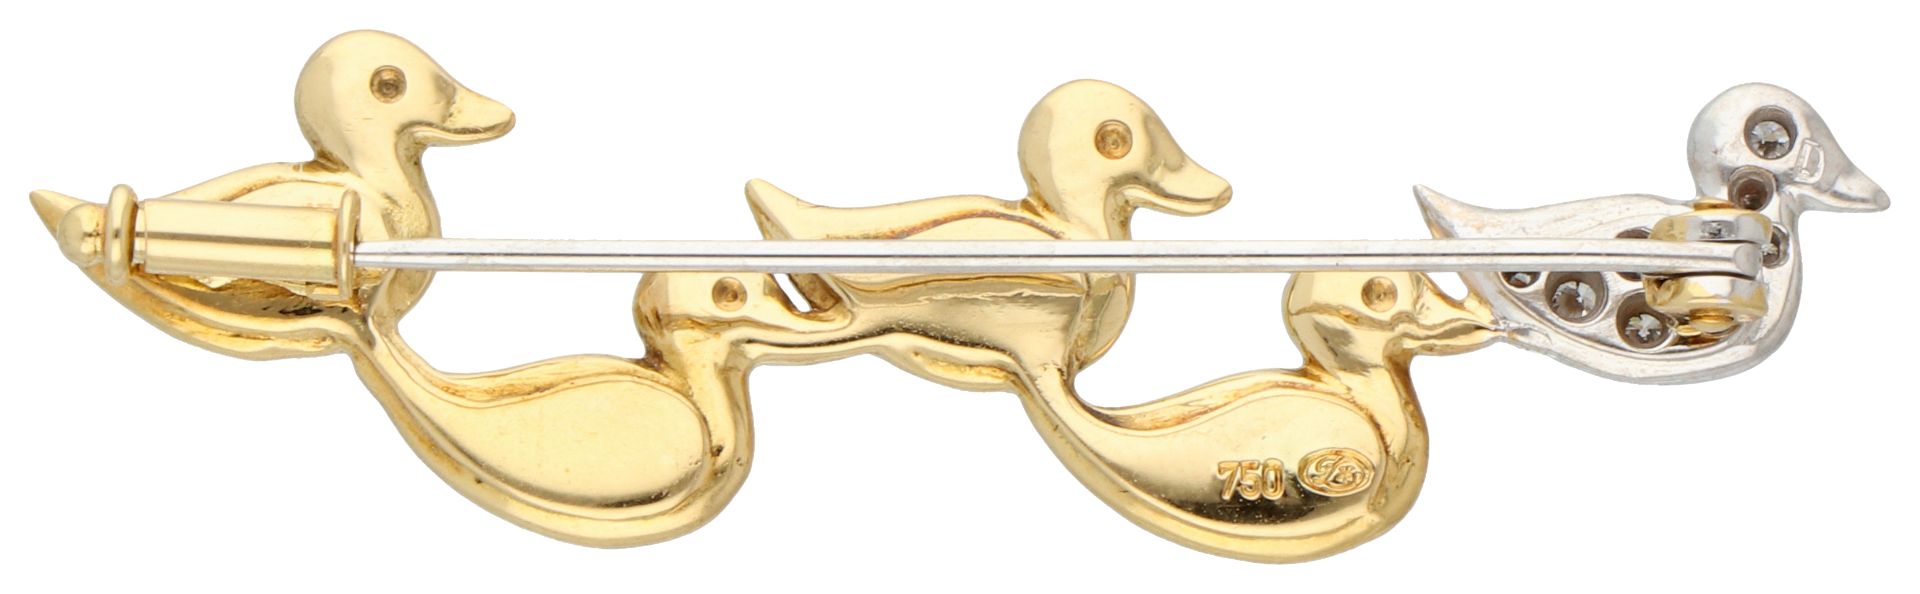 No reserve - 18K White gold brooch of five ducks set with approx. 0.06 ct. diamond. - Image 2 of 2